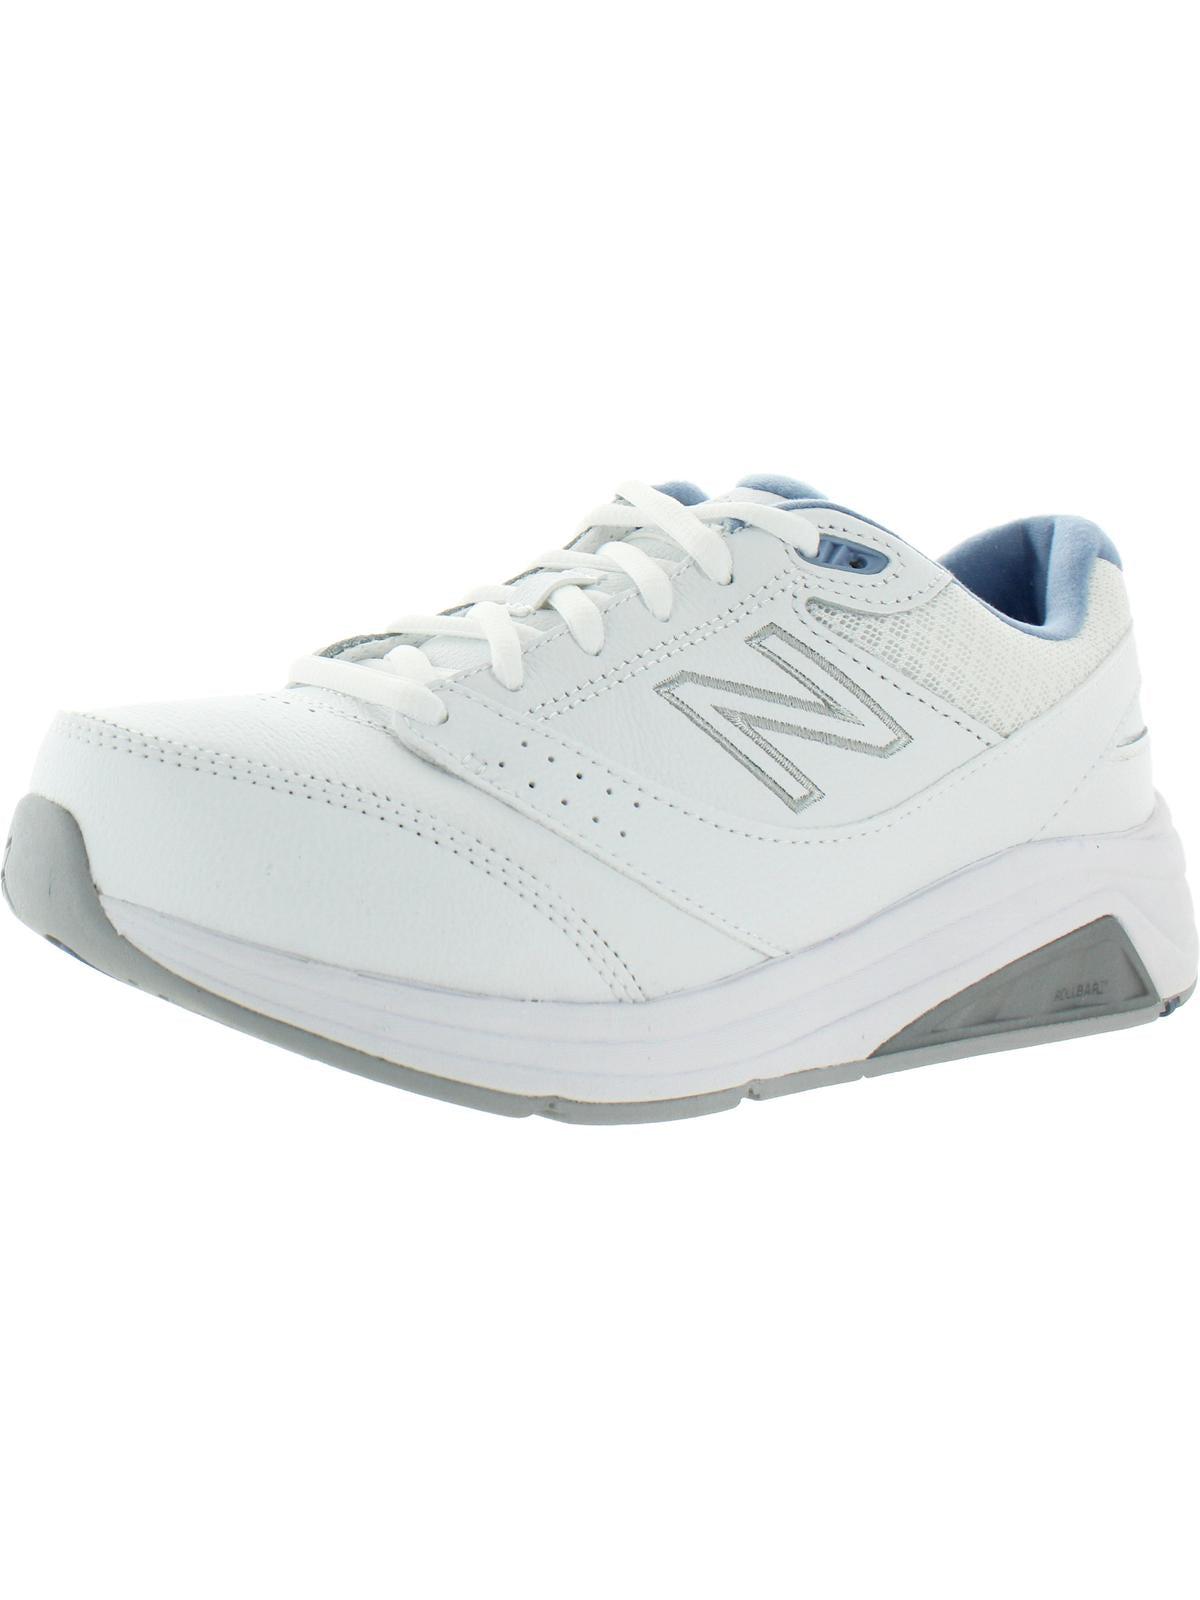 New Balance 928v3 Trainers Rollbar Walking Shoes in White | Lyst